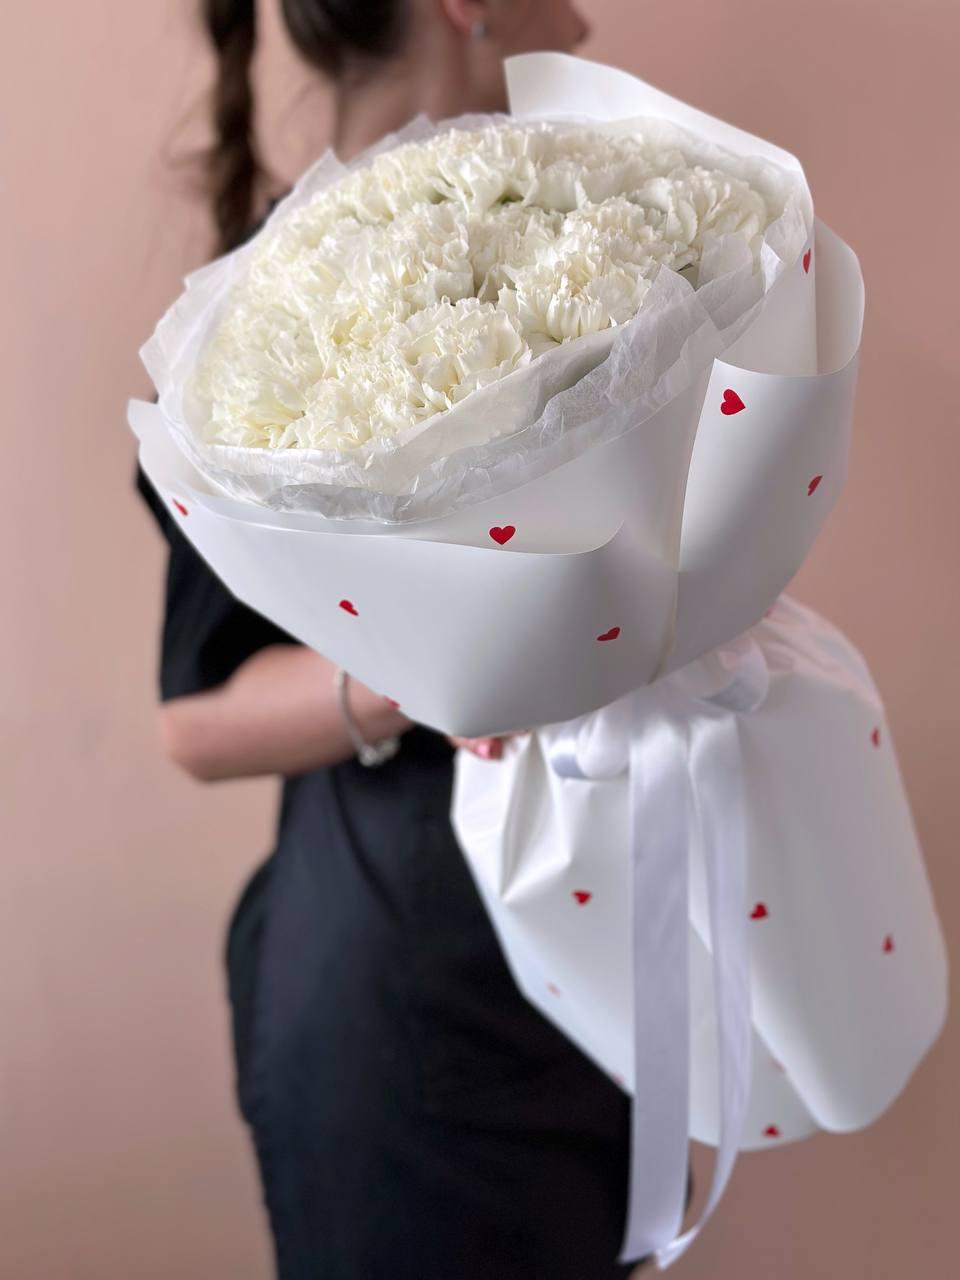 Bouquet of carnations "Hearts"